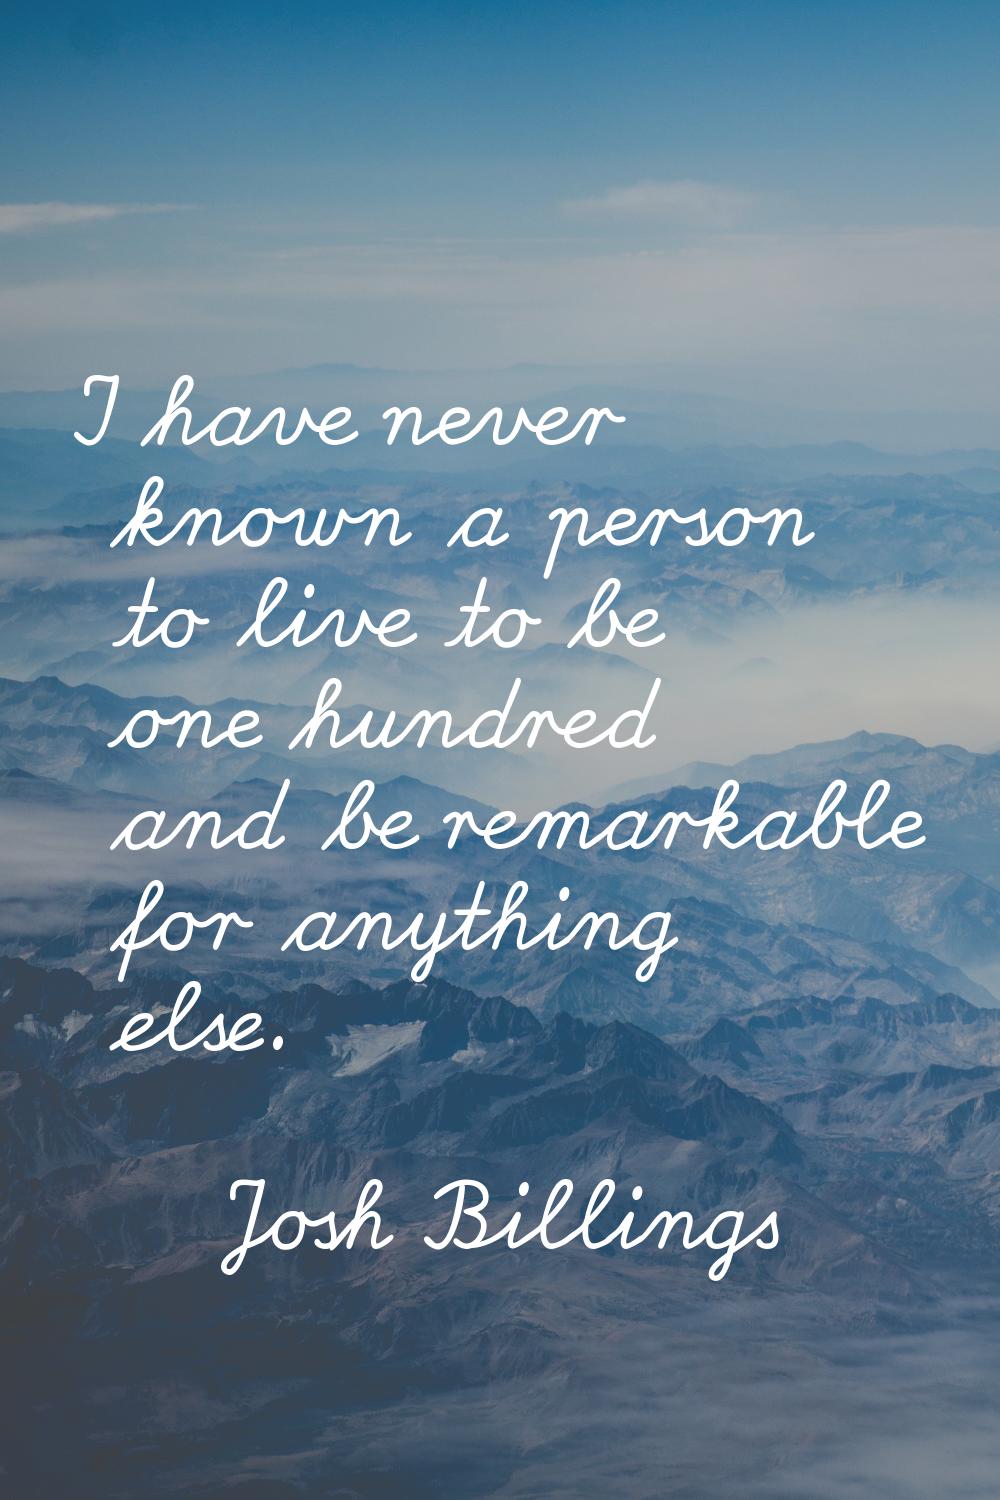 I have never known a person to live to be one hundred and be remarkable for anything else.